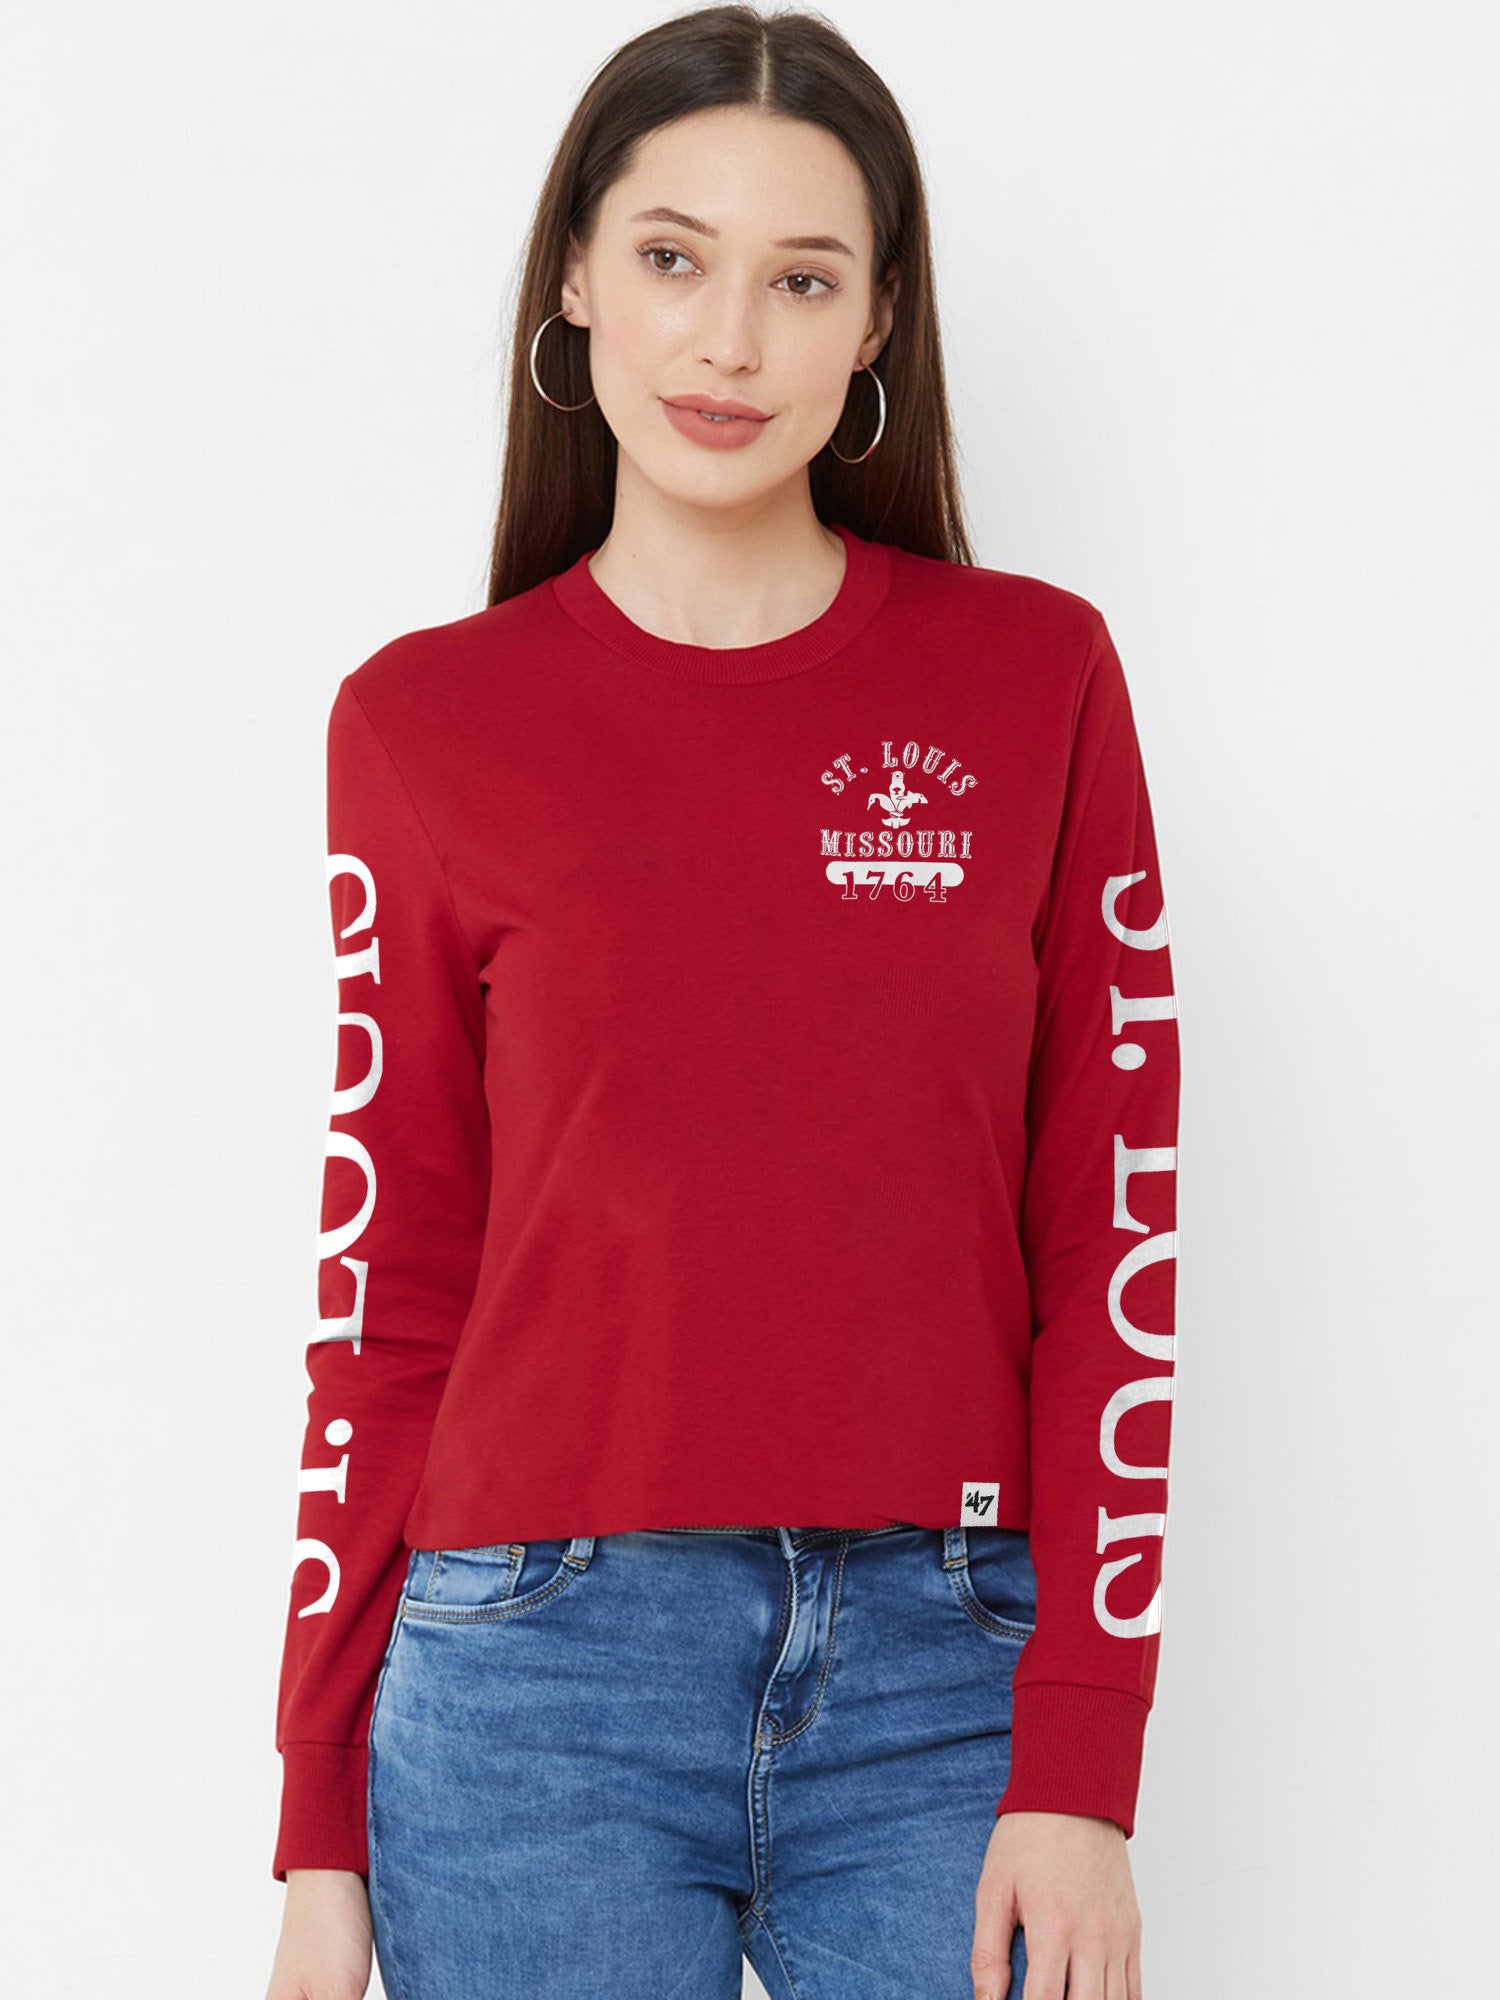 47 Crew Neck Full Sleeve Crop Tee Shirt For Ladies-Red-SP1983